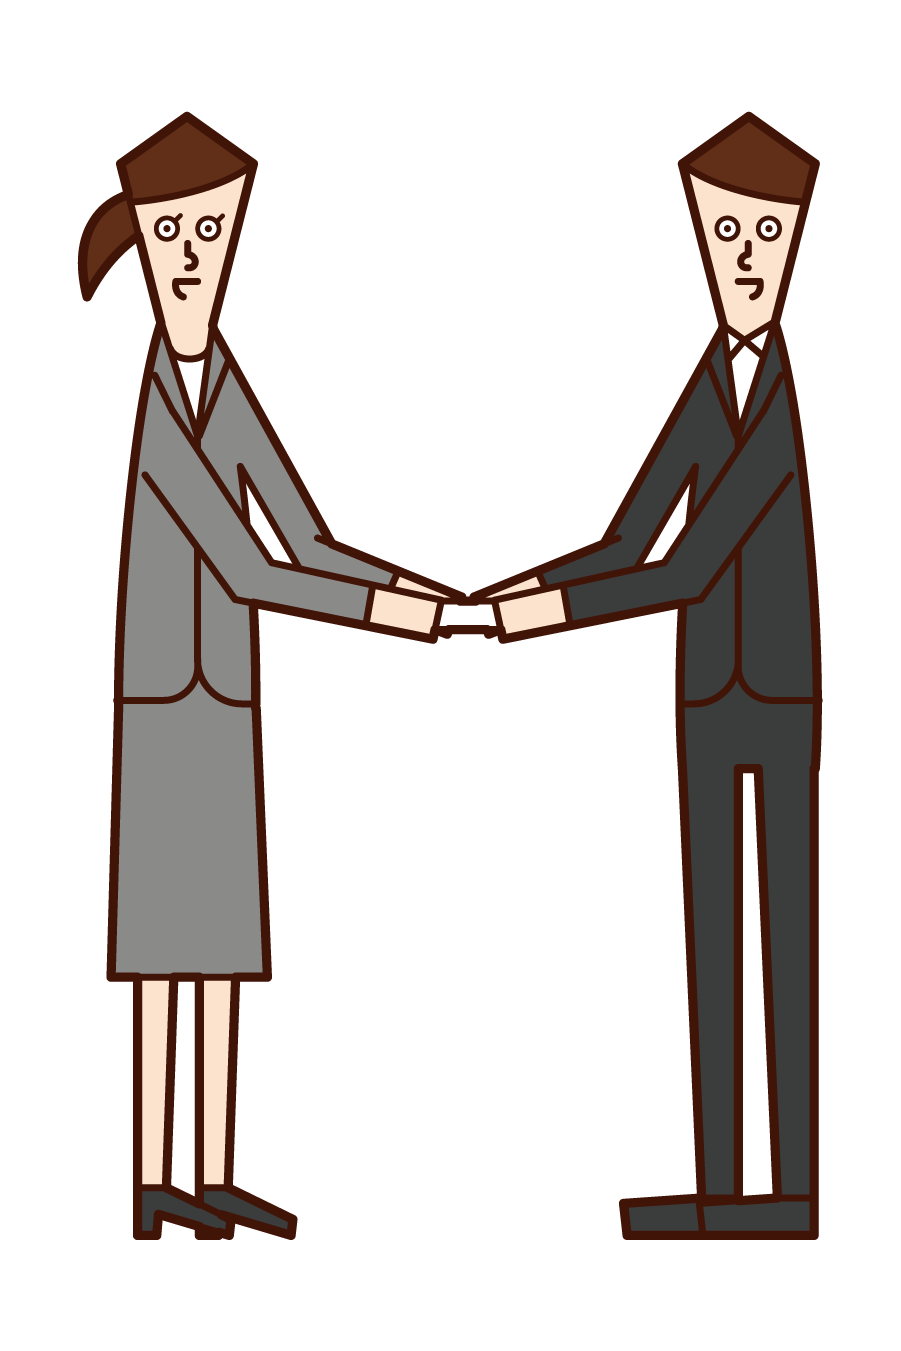 Illustration of a man and a woman exchanging business cards